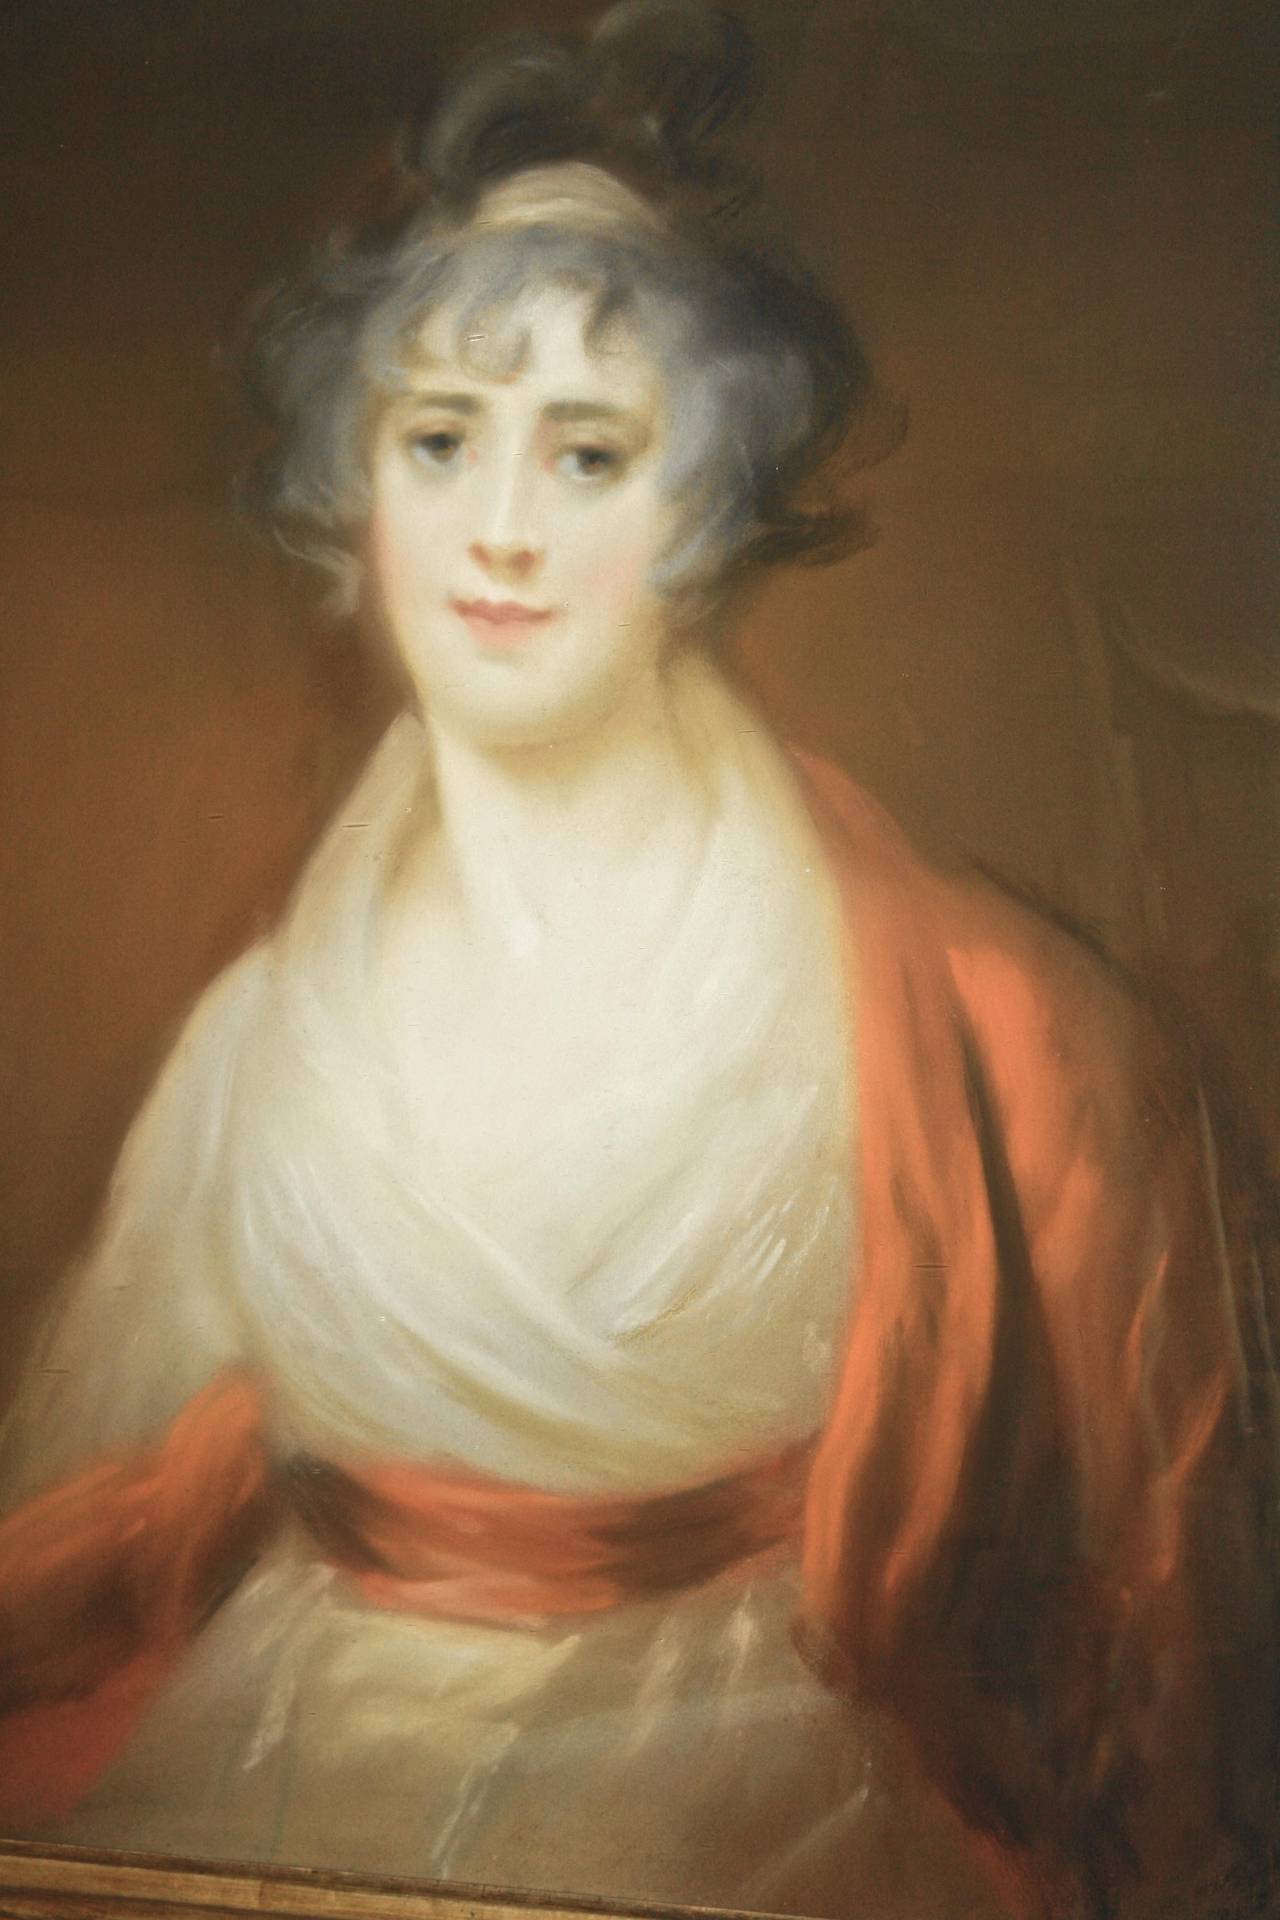 Lord Byron's half-sister, Augusta Maria Byron (the Honorable Mrs. George Leigh), gave birth to seven children while married to her cousin Lieutenant Colonel George Leigh. Her third daughter, Elizabeth Medora Leigh born 1814, was and is believed to